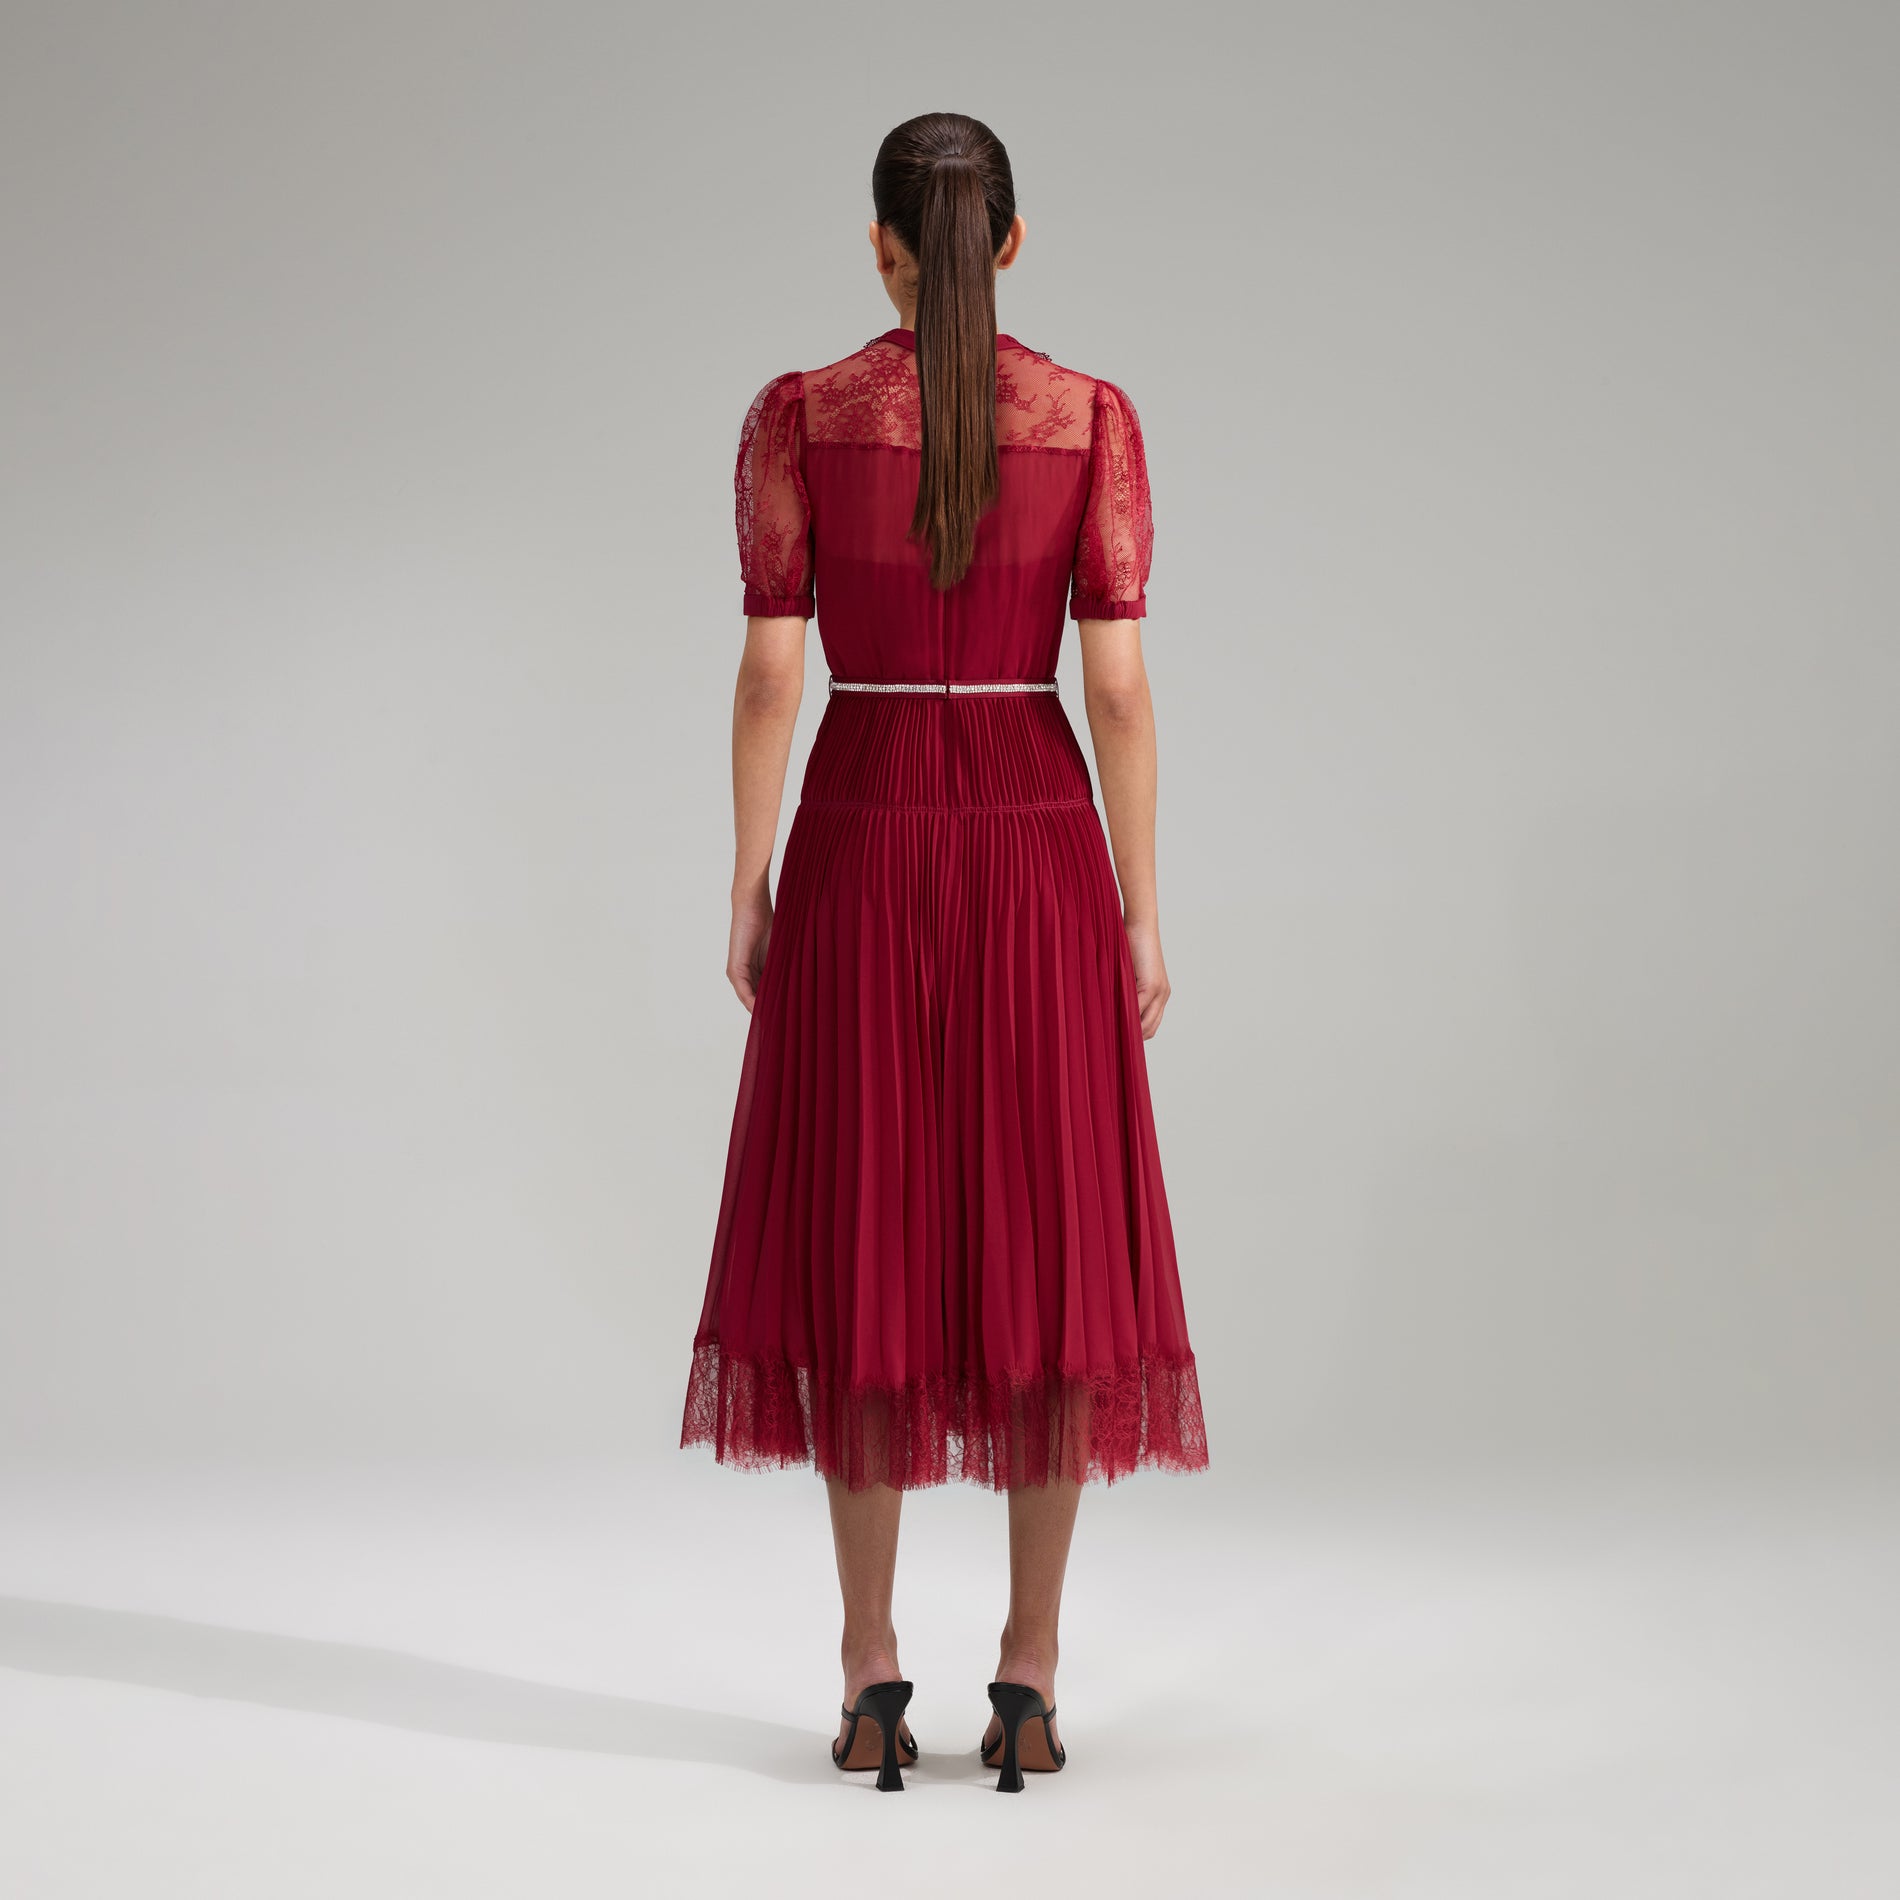 A woman wearing the Burgundy Lace Trim Pleated Midi Dress